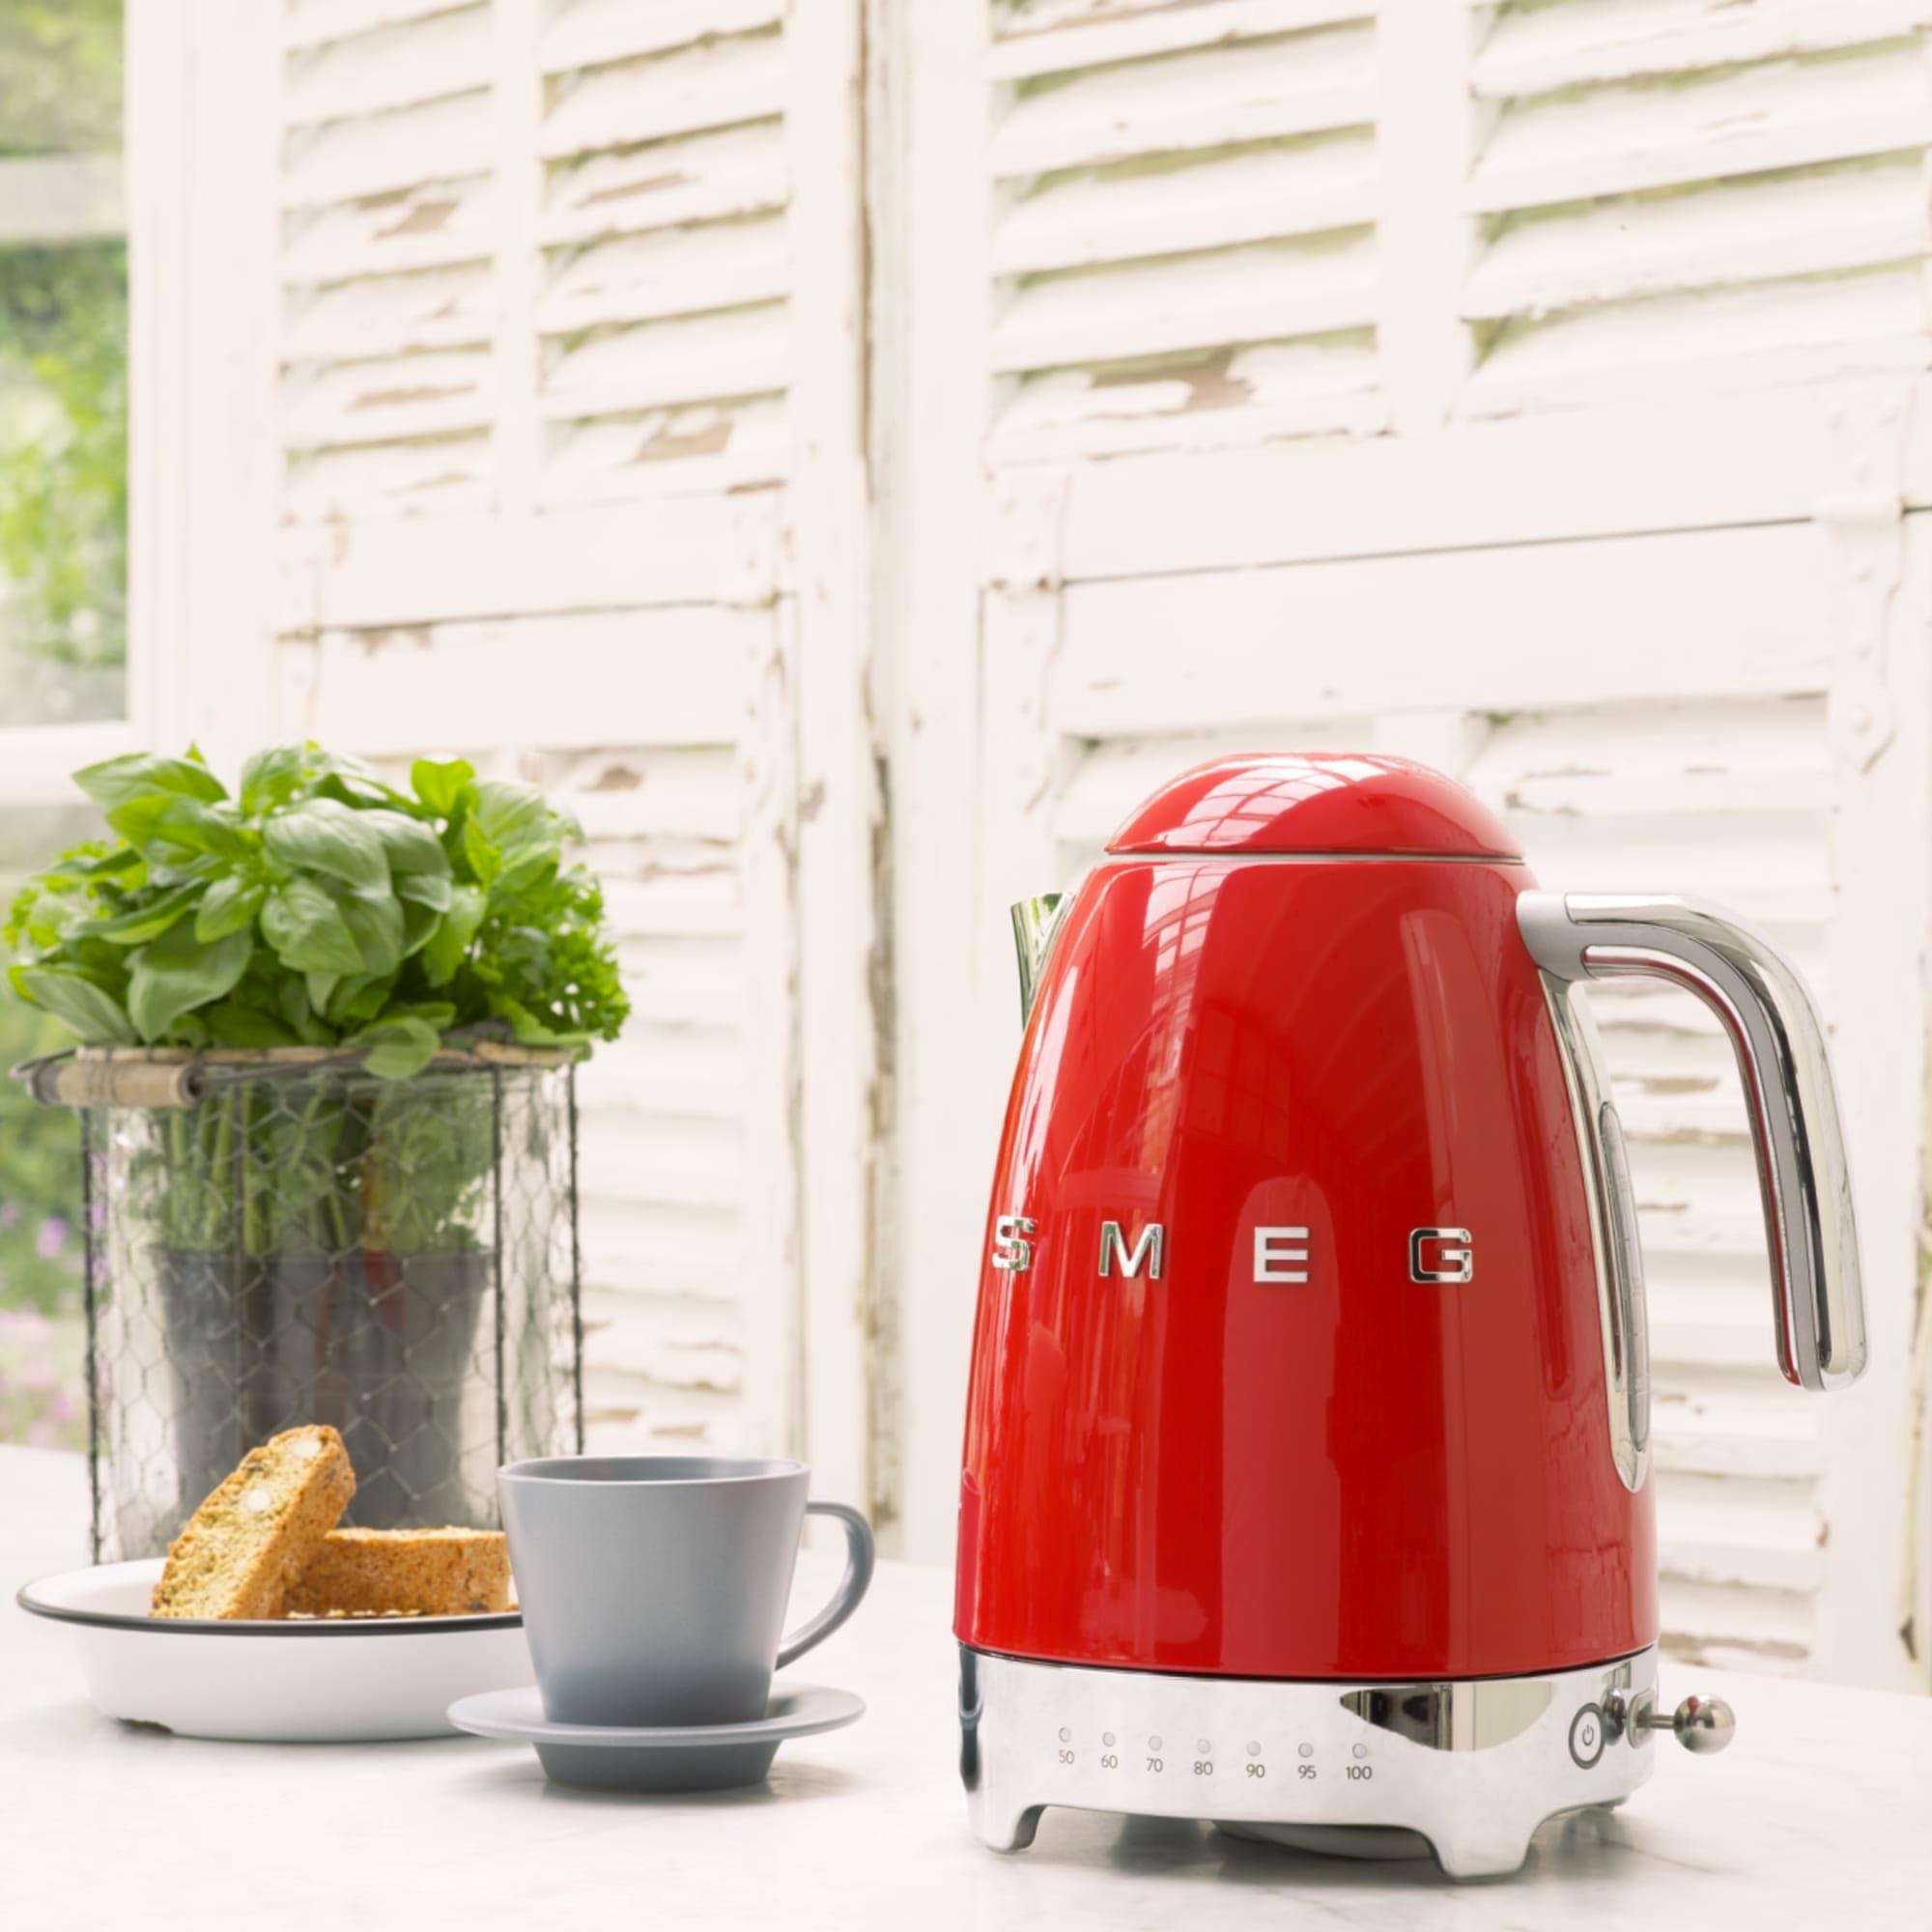 Smeg 50's Retro Style Variable Temperature Kettle 1.7L Red Image 7